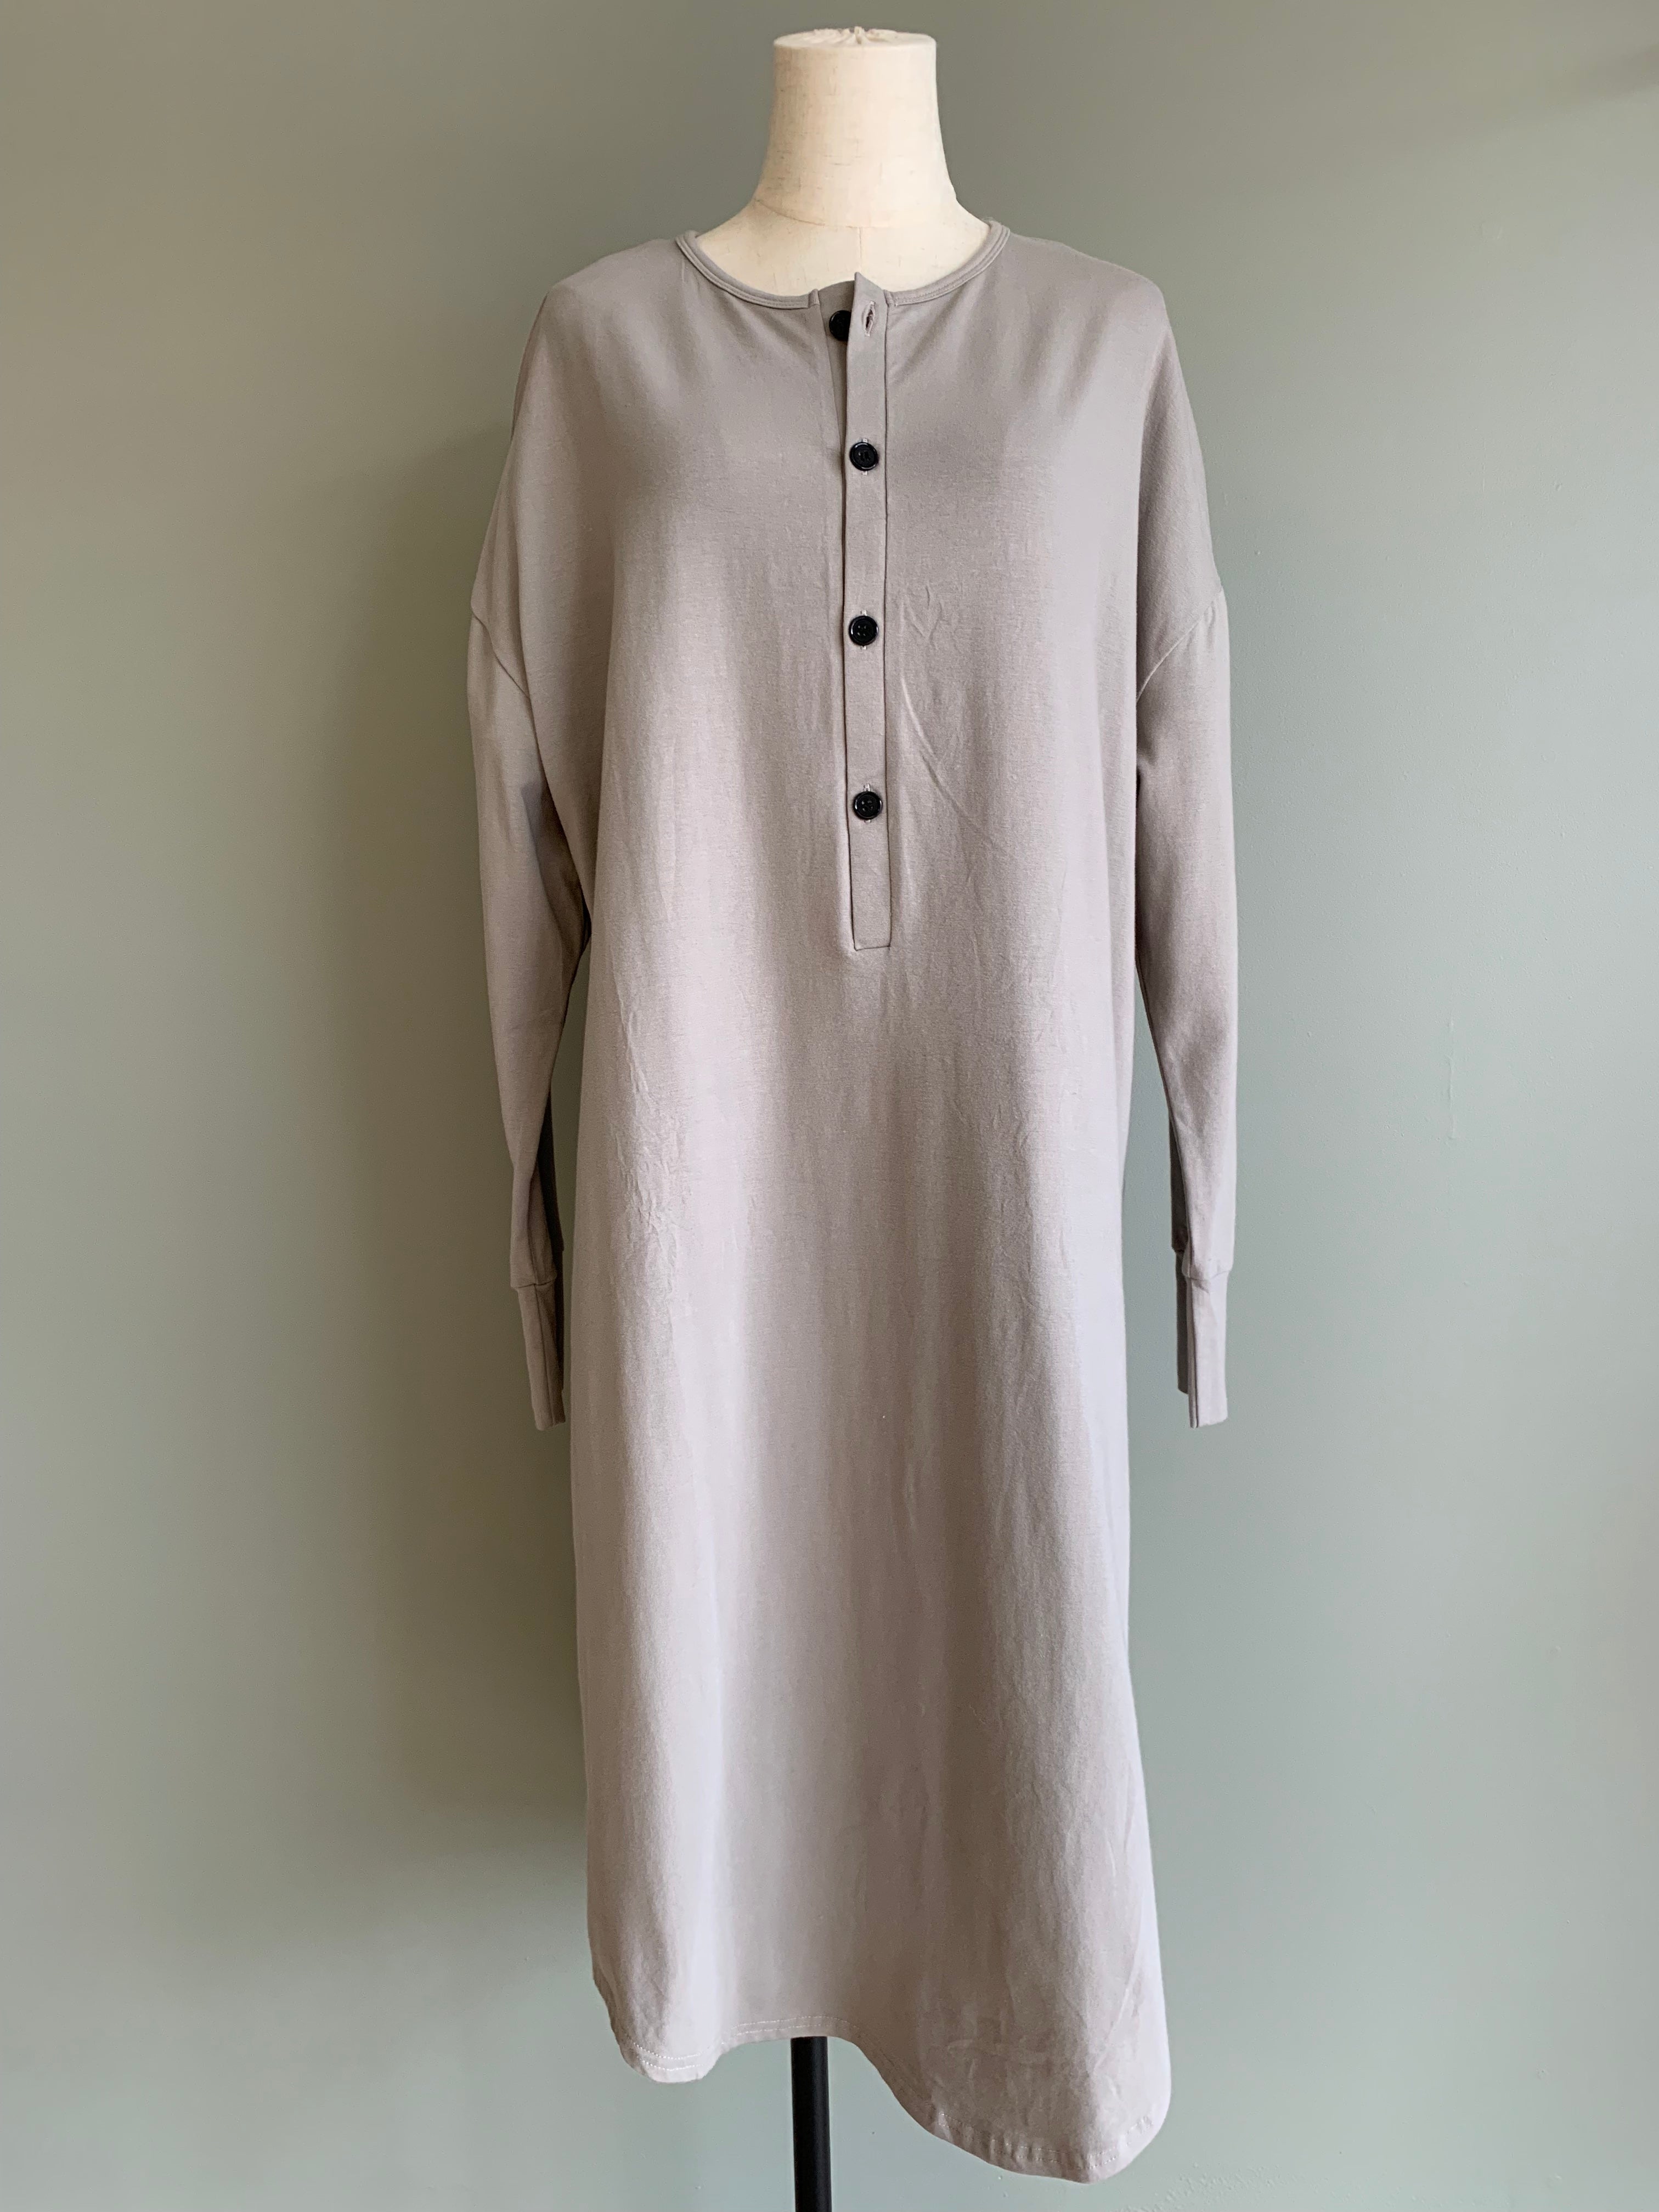 cotton t-shirt robe in driftwood